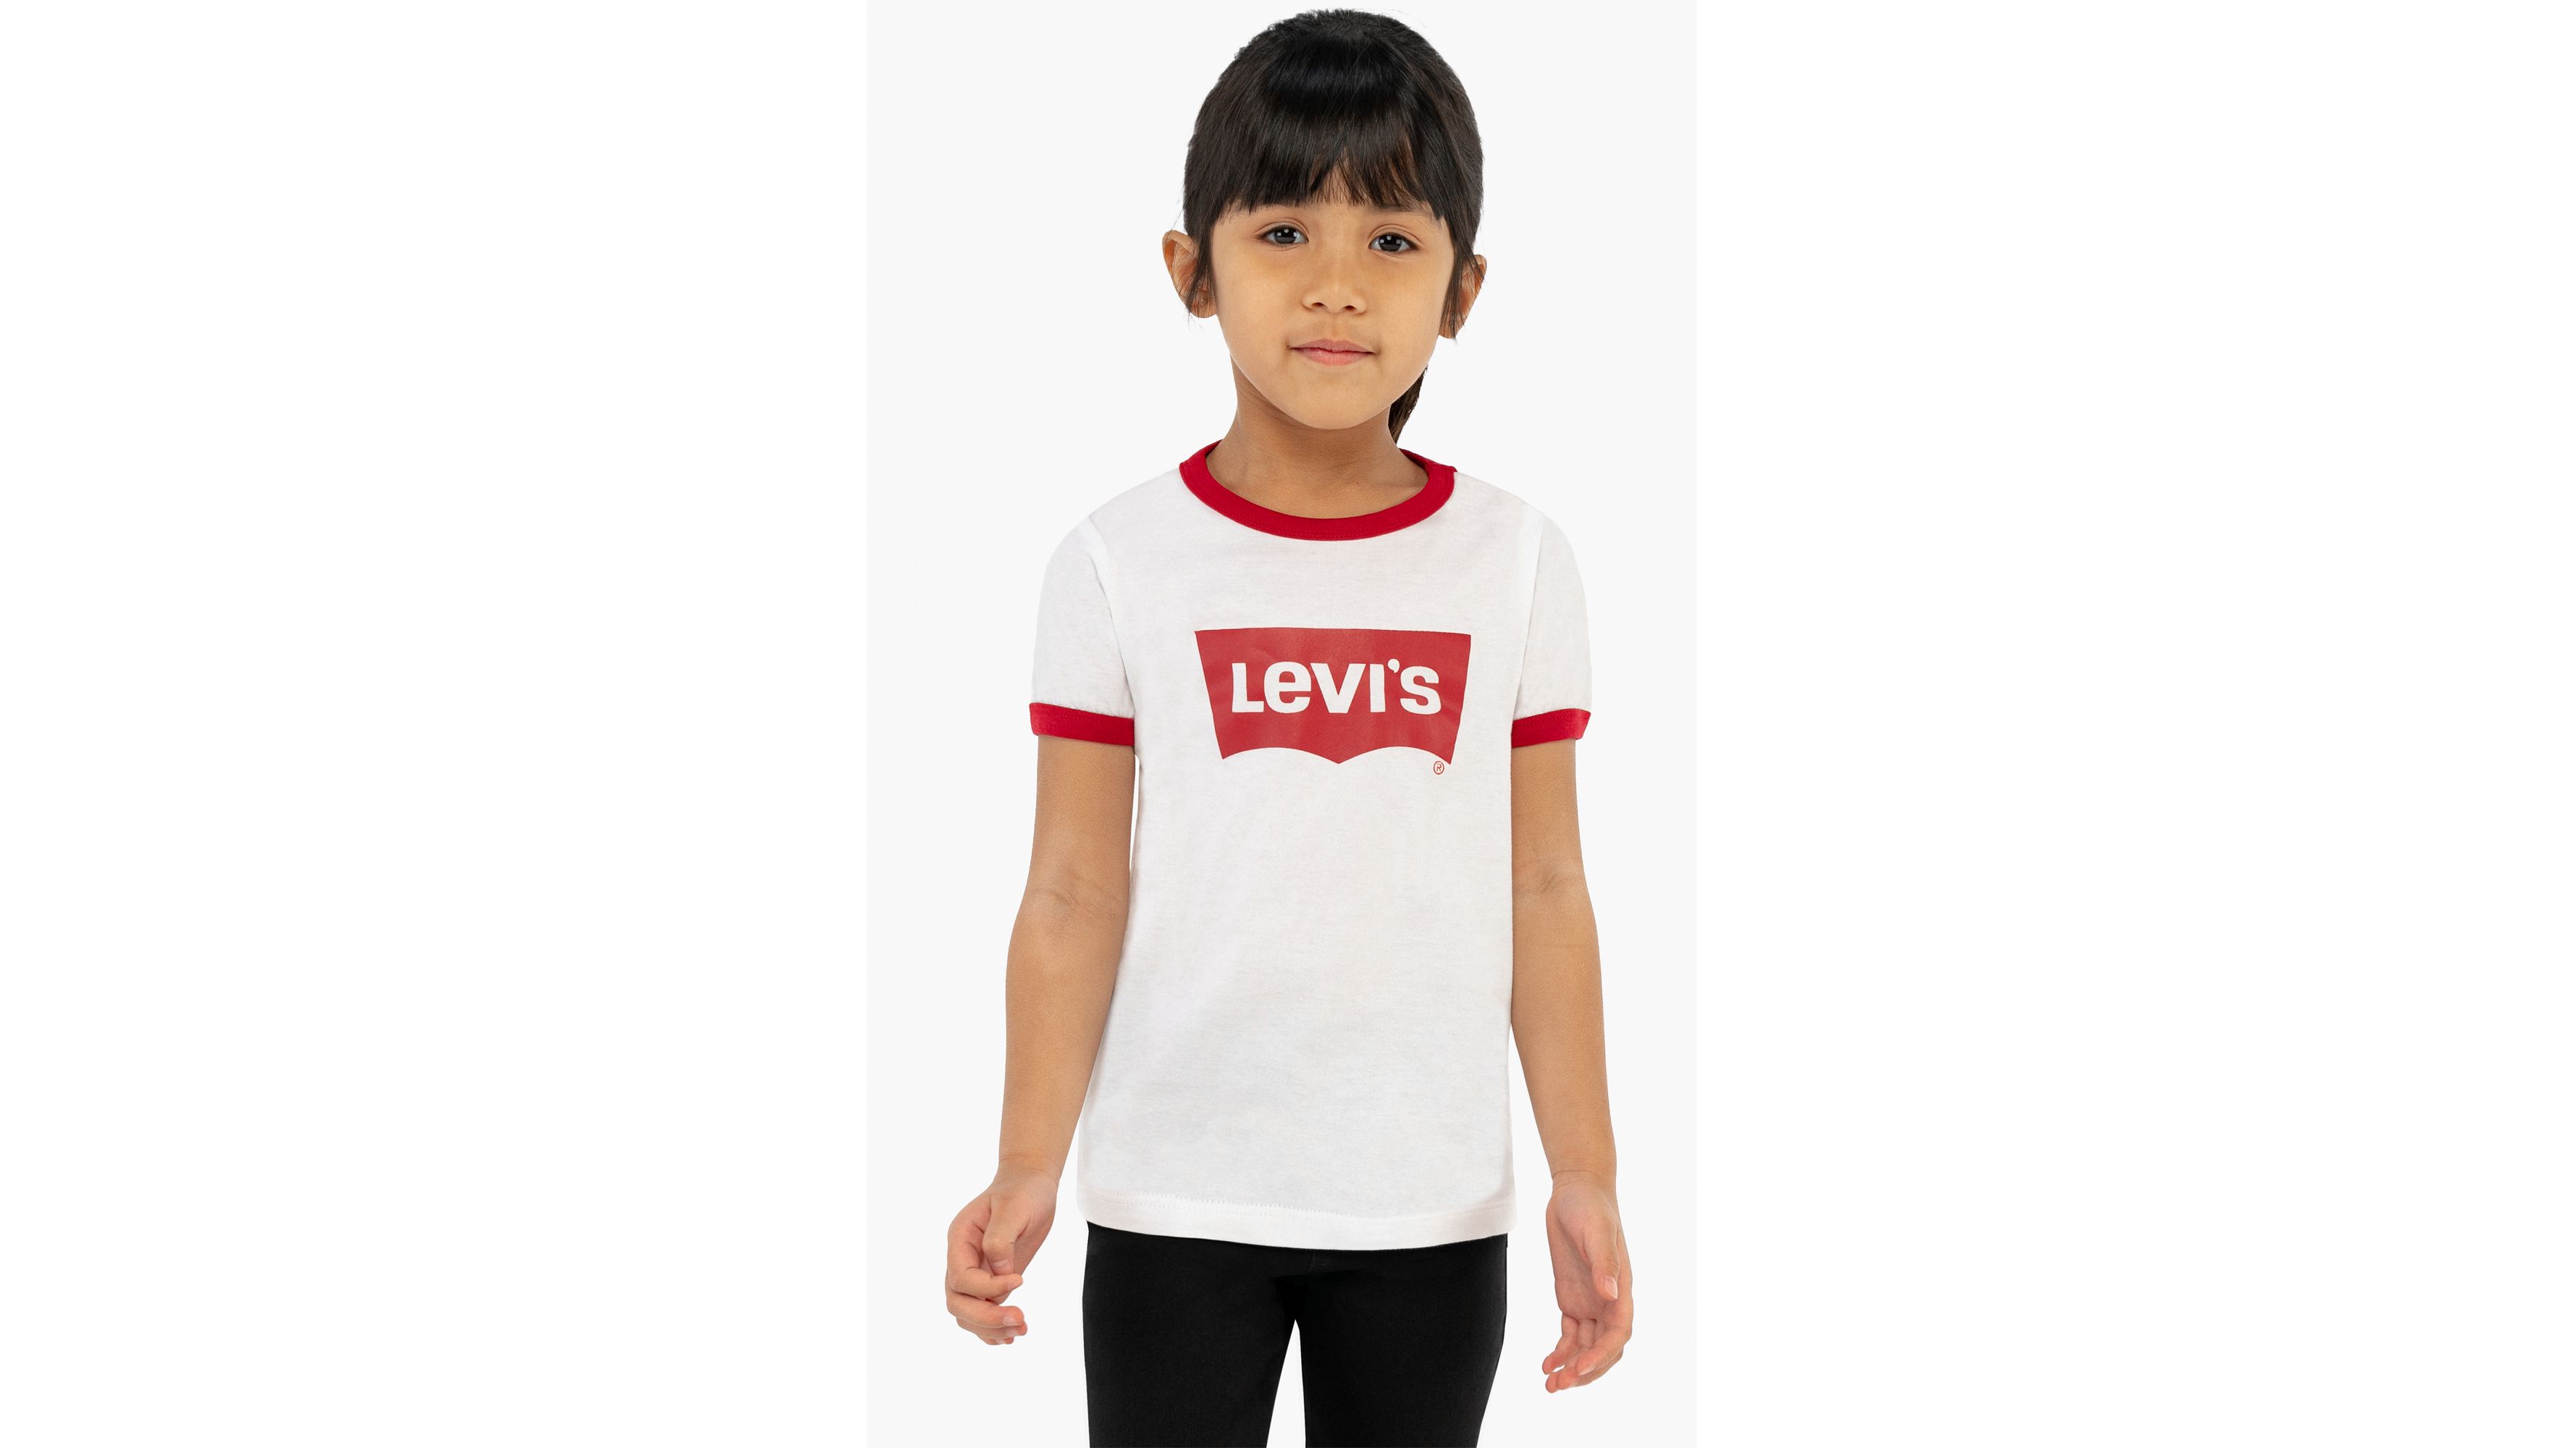 childrens levis clothing